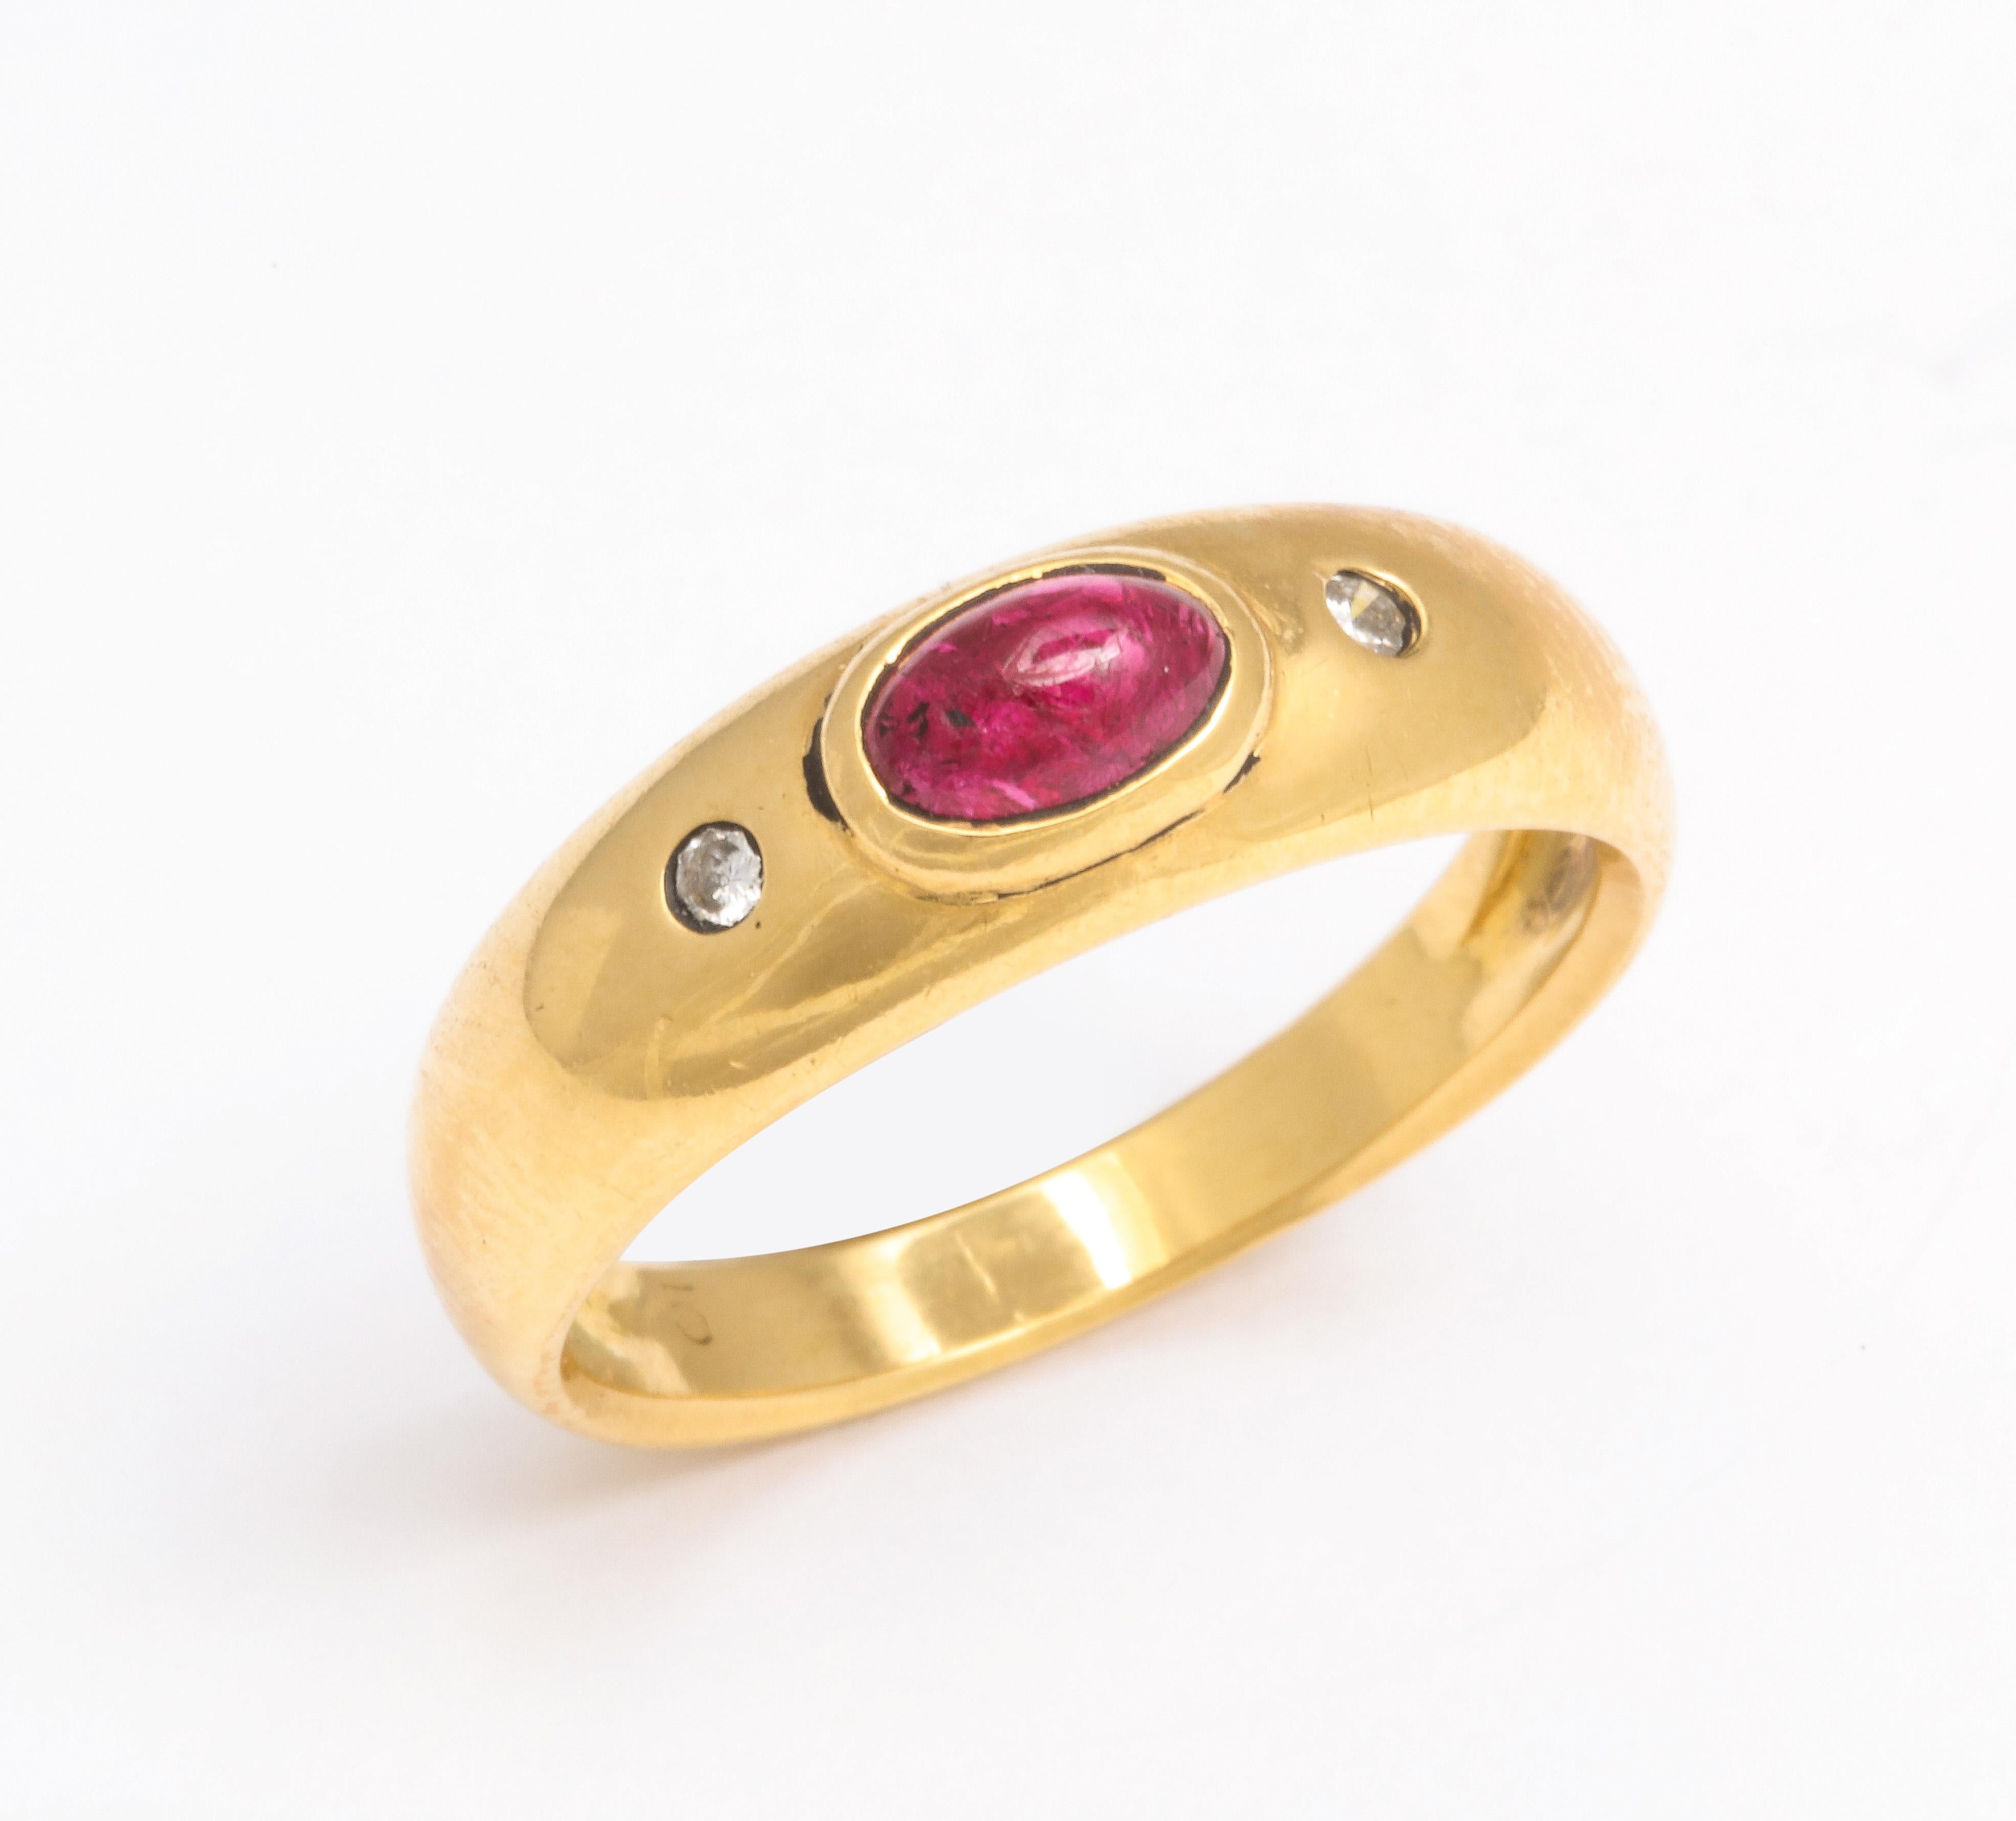 A fine cabochon ruby center stone with nice quality diamonds on each side.  This classic 18K Gypsy ring 
has flush mounted stones which is typical of the style ring.